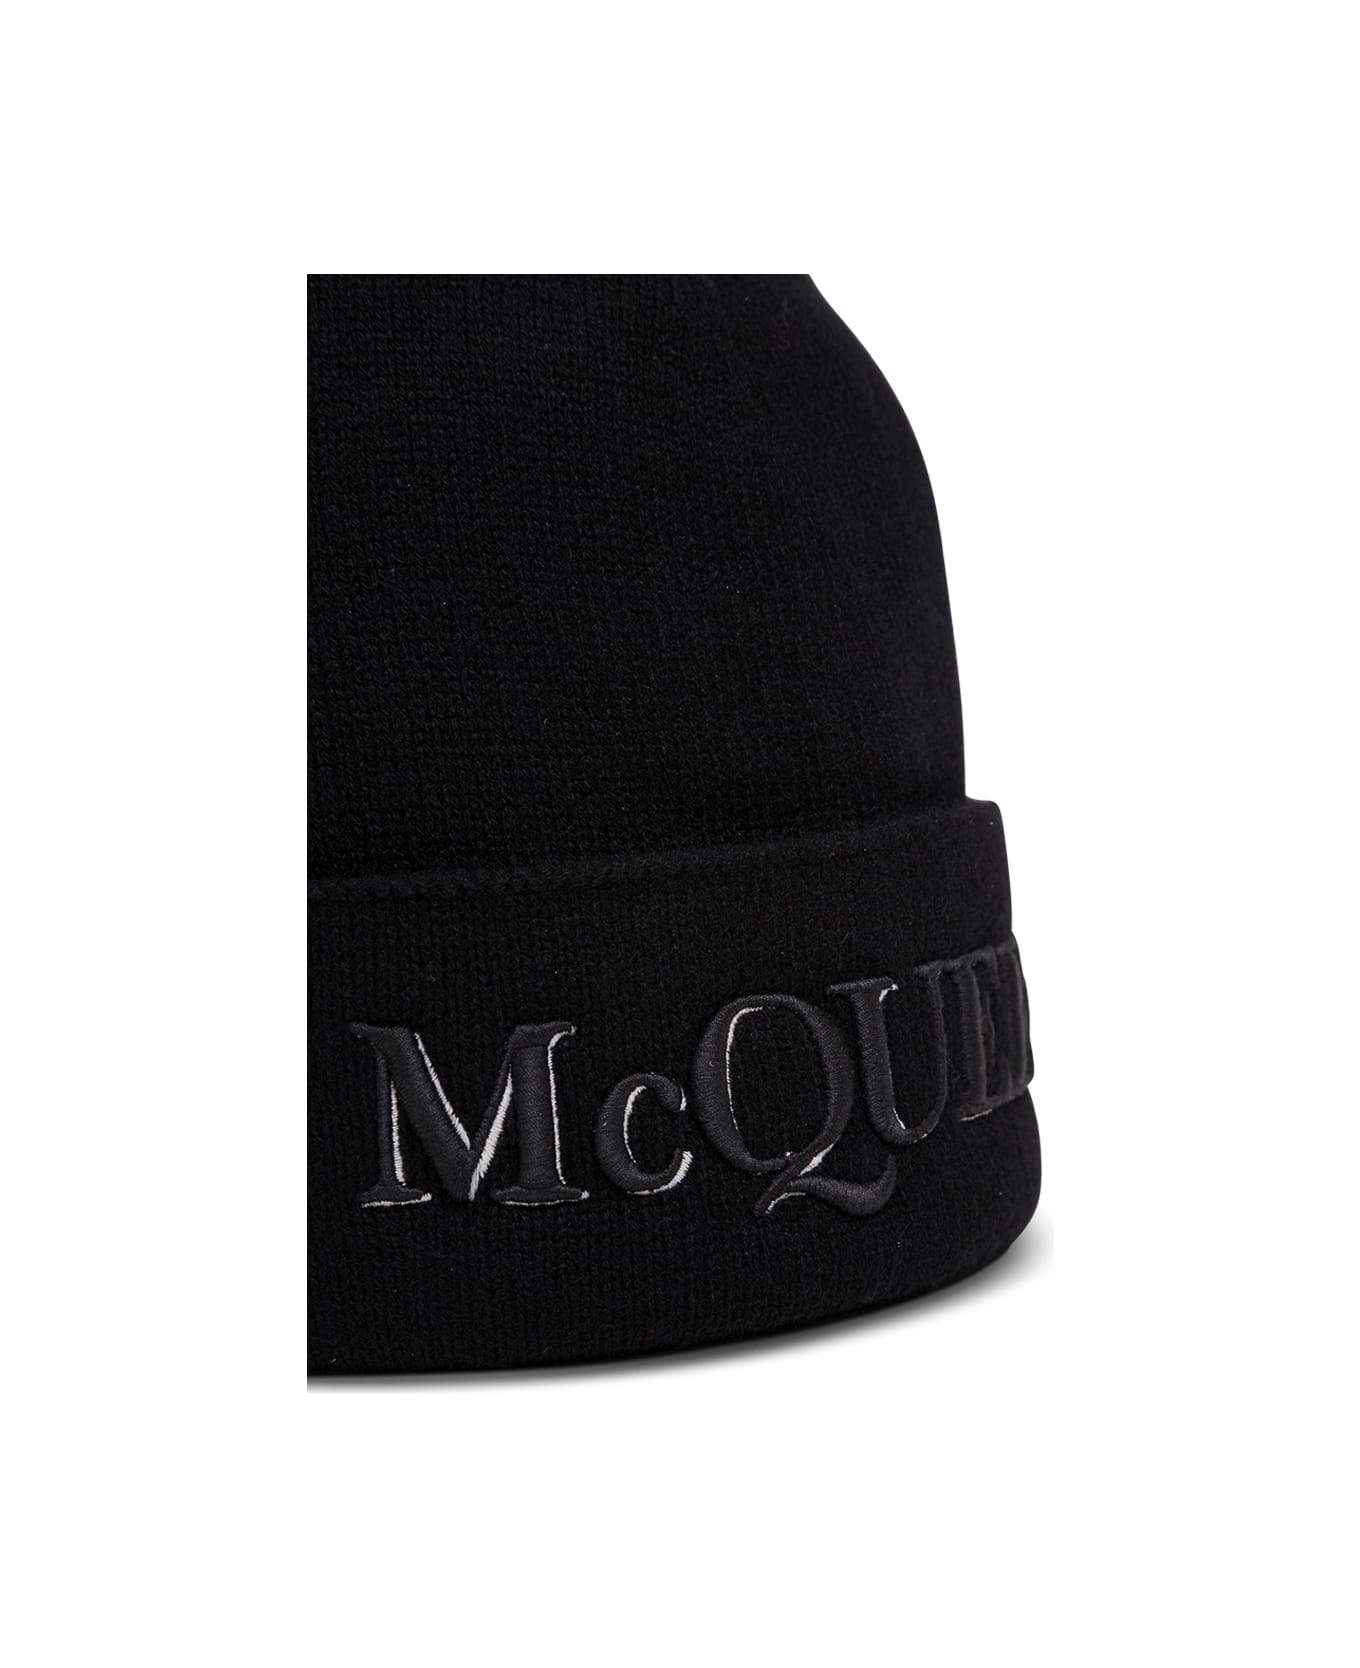 Alexander McQueen Black Wool And Cashmere Hat With Logo - Black 帽子